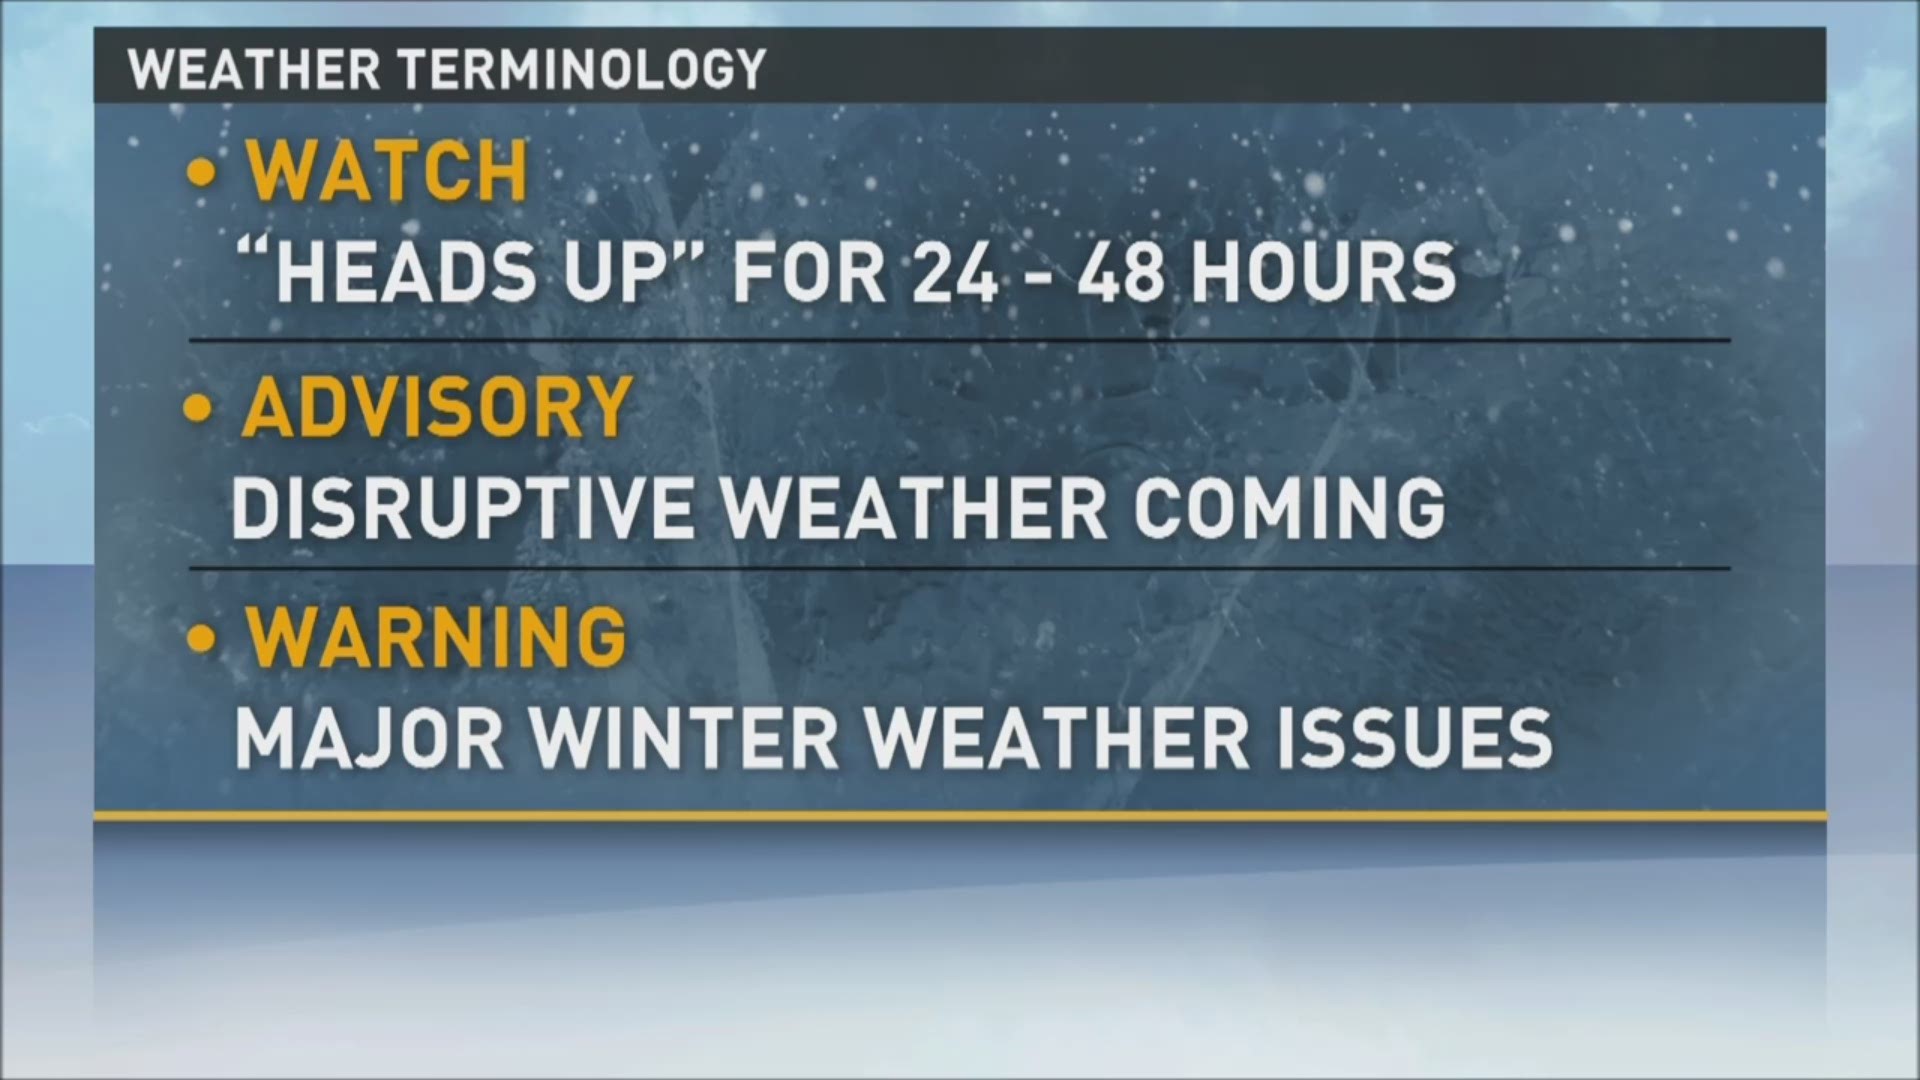 Winter Weather Terminology: The differences between a watch, warning, and an advisory.